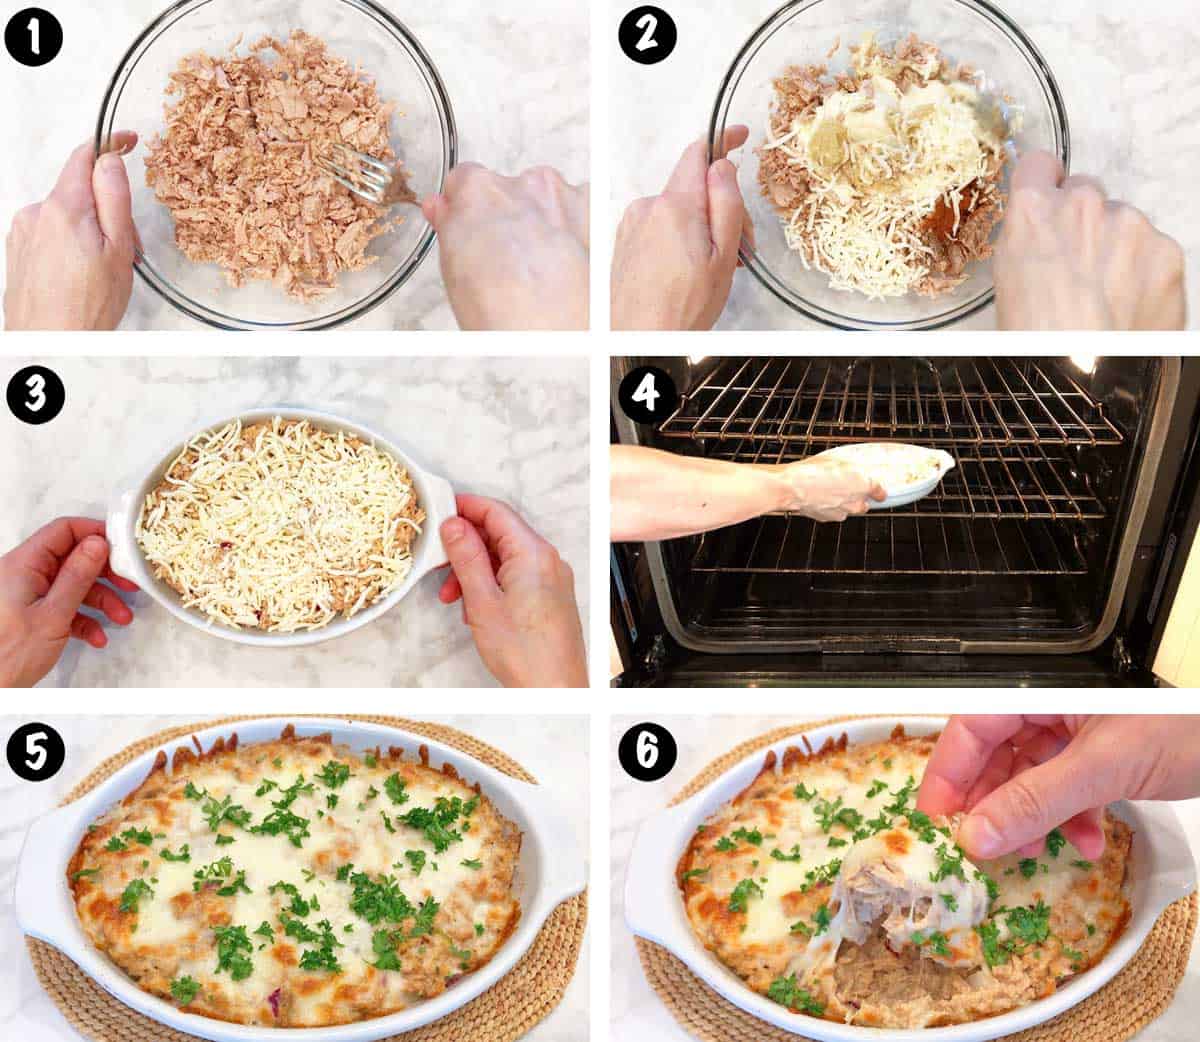 A photo collage showing the steps for making a tuna casserole. 